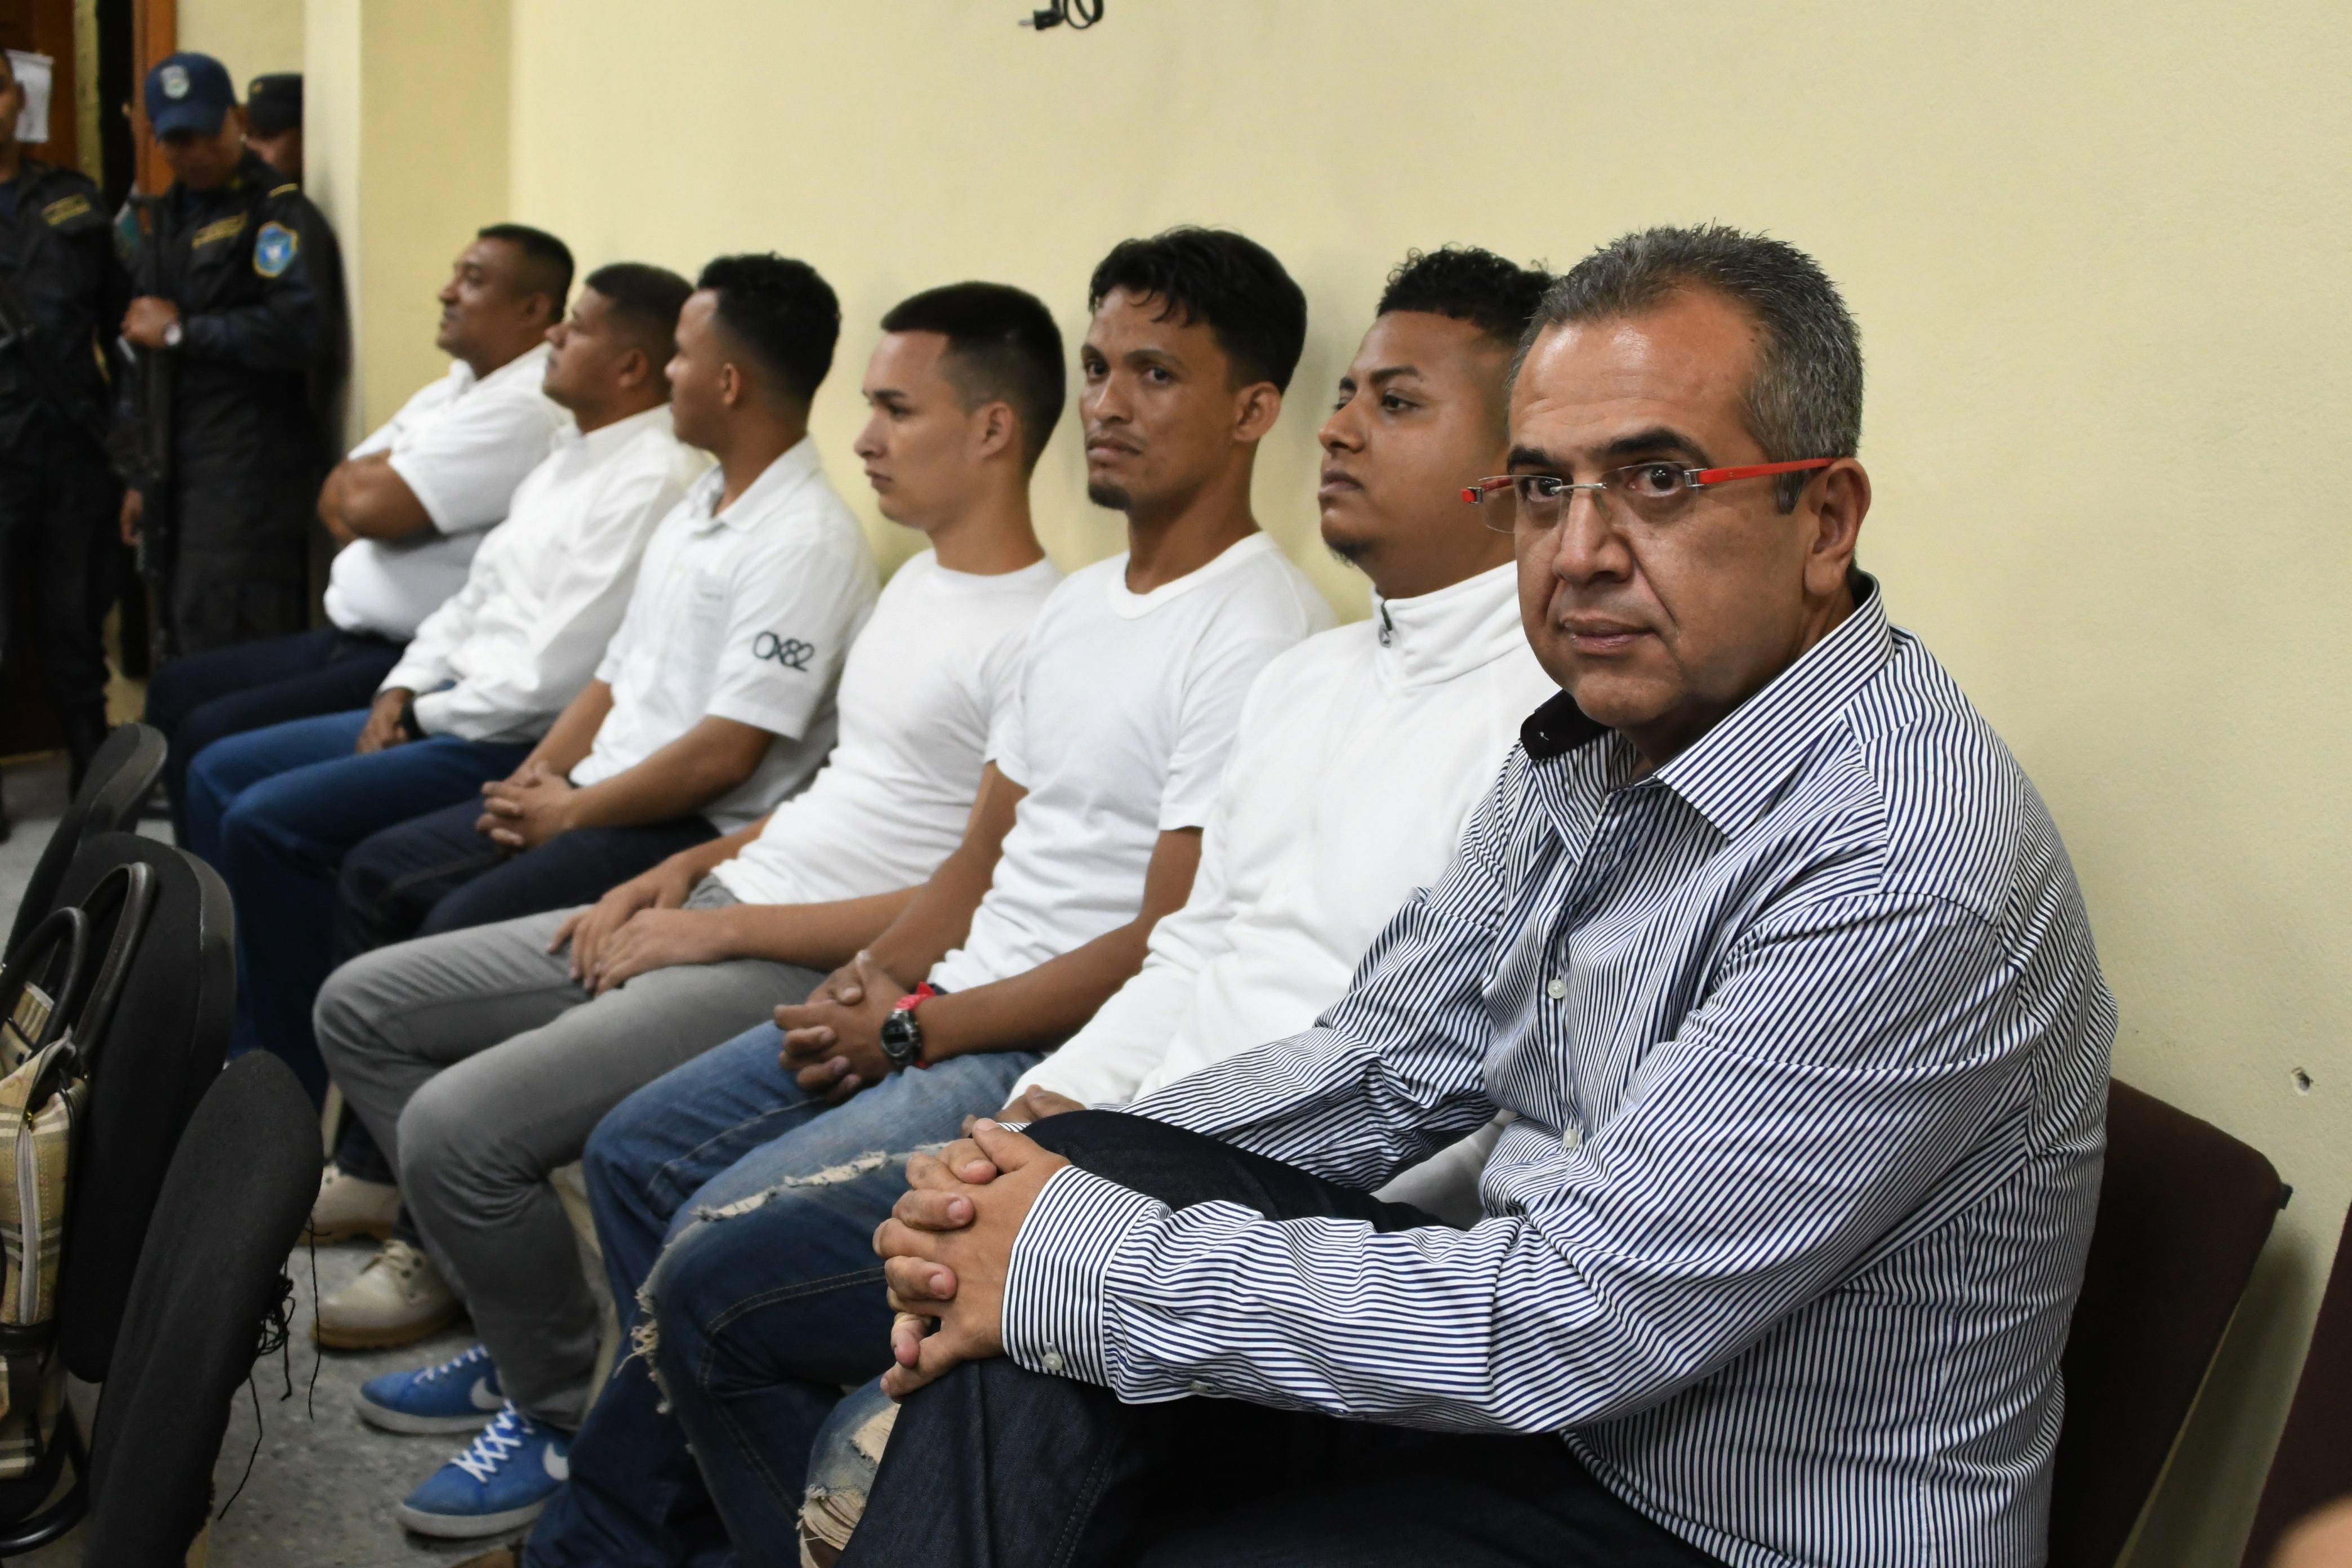 Sergio Rodriguez (right), along with six others who were accused of murdering&nbsp;indigenous environmental activist Berta Cáceres, sits in a Tegucigalpa, Honduras, courtroom on Sept.&nbsp;17, 2018.